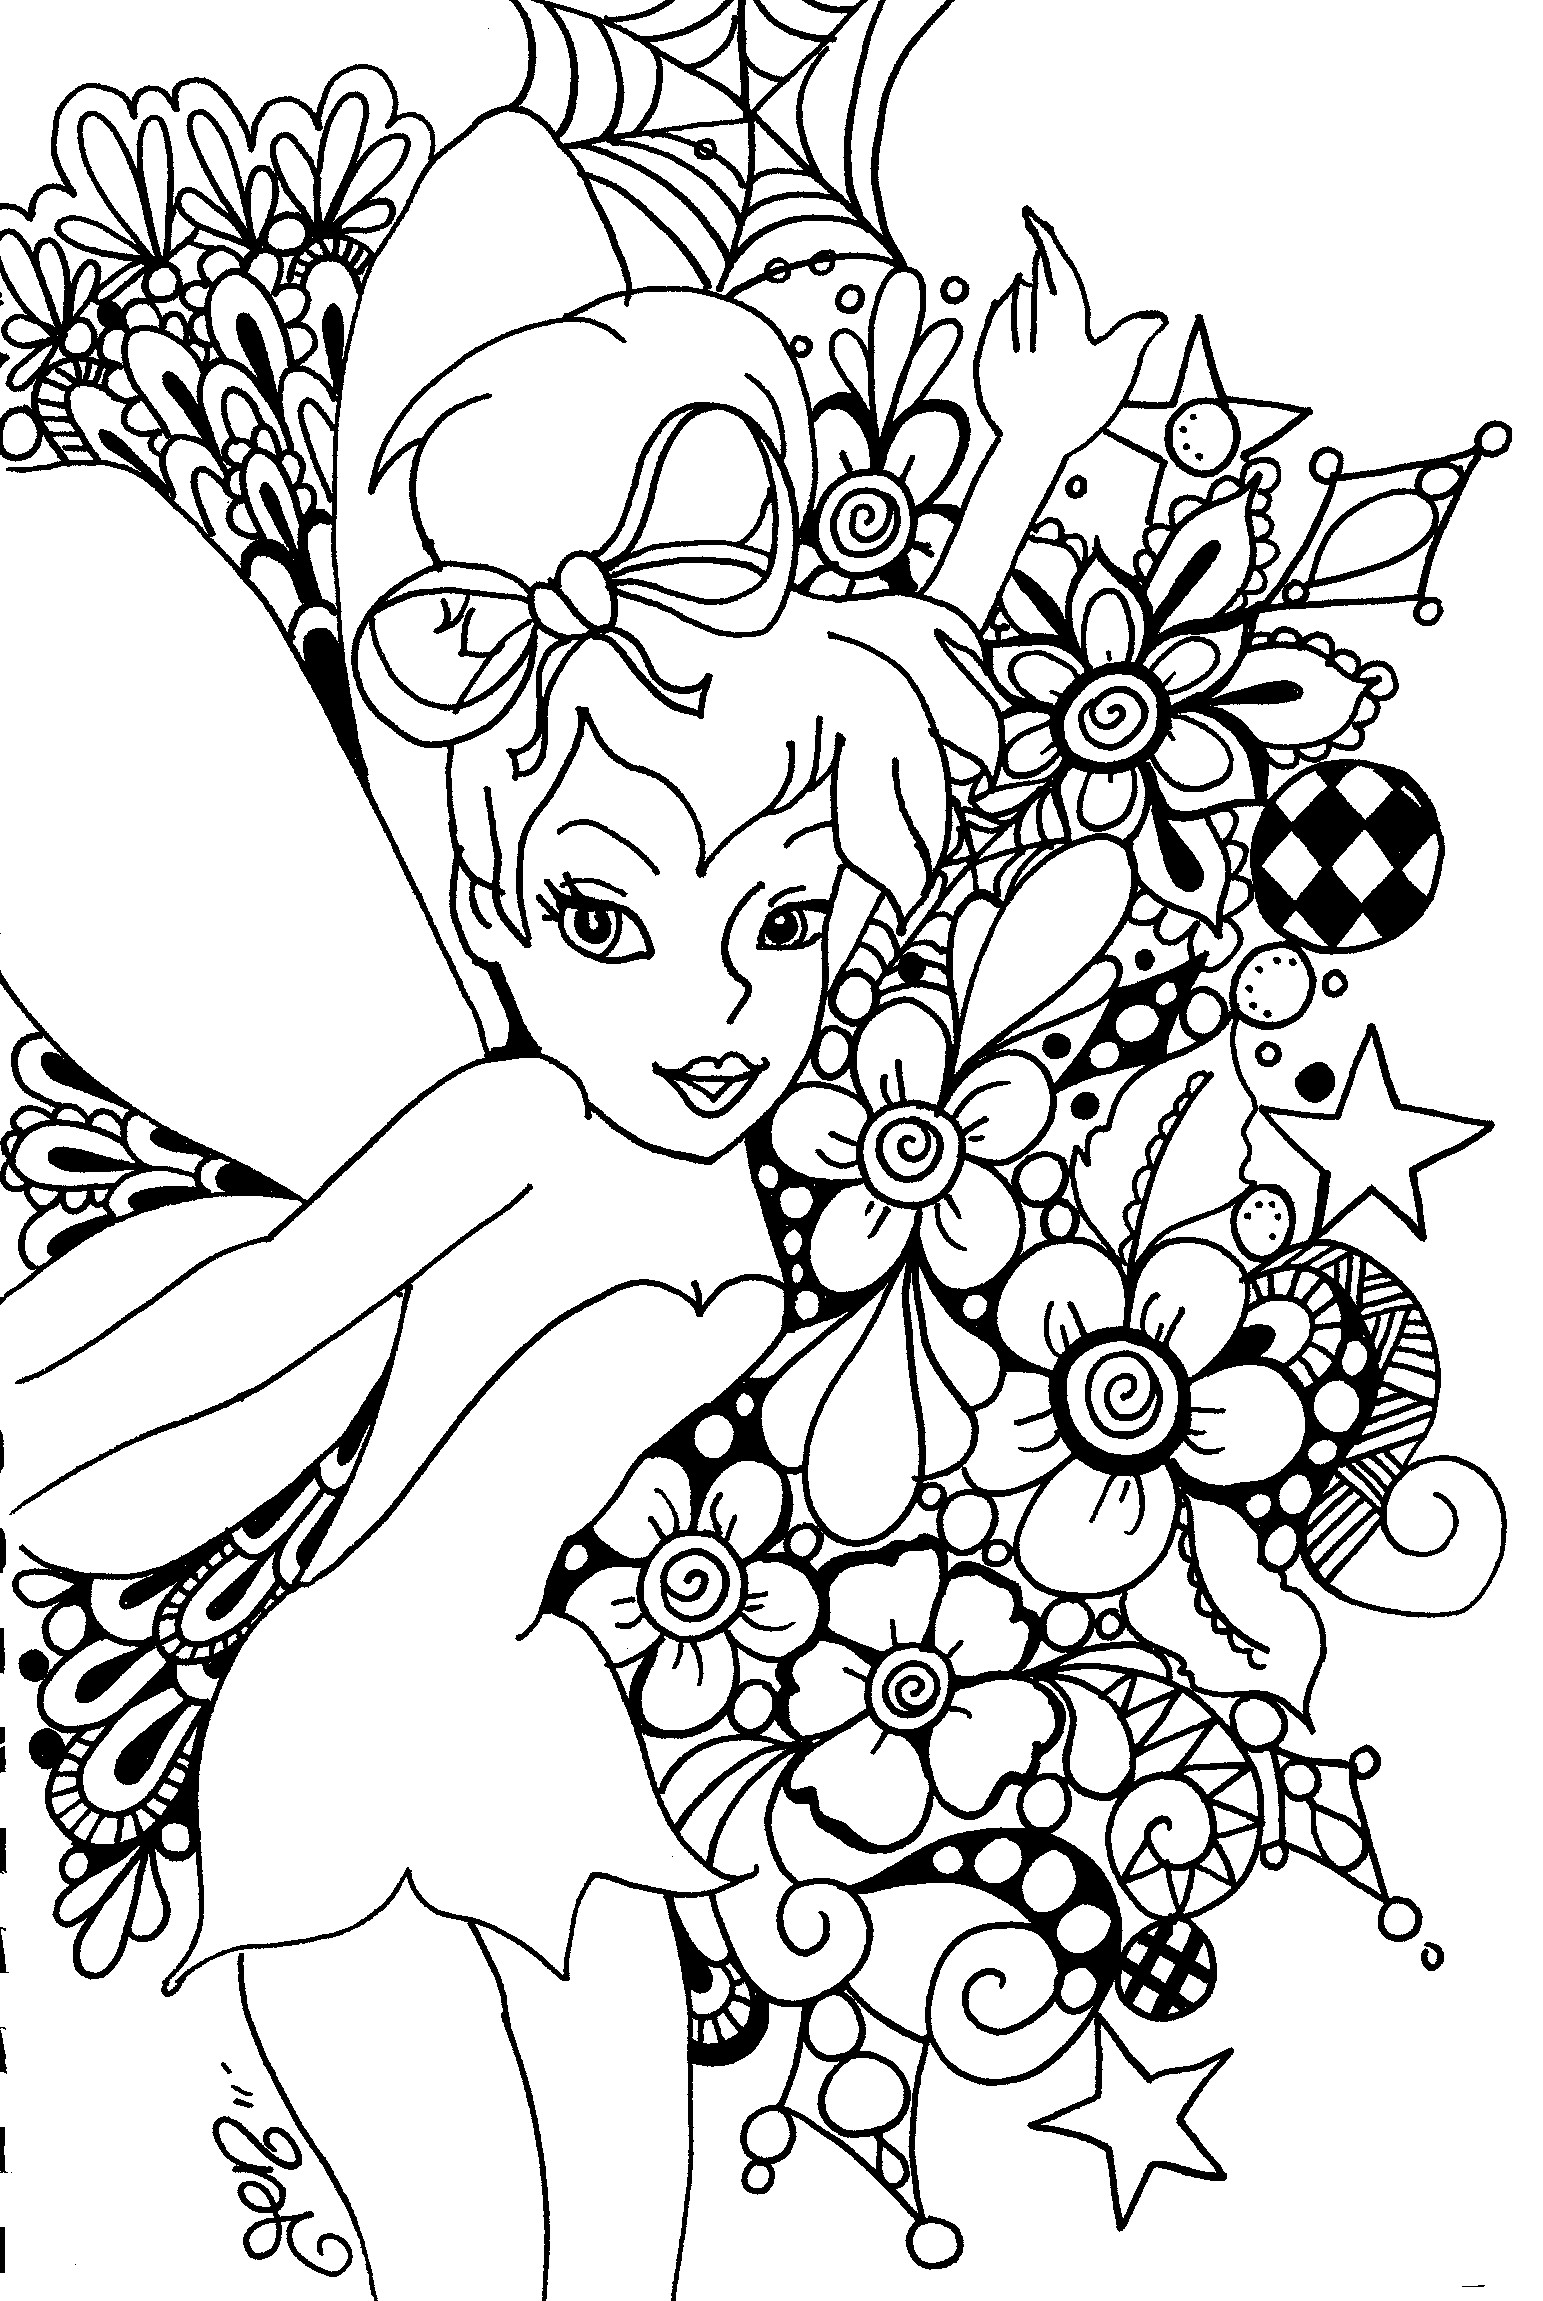 Tinkerbell Coloring Pages Online Image